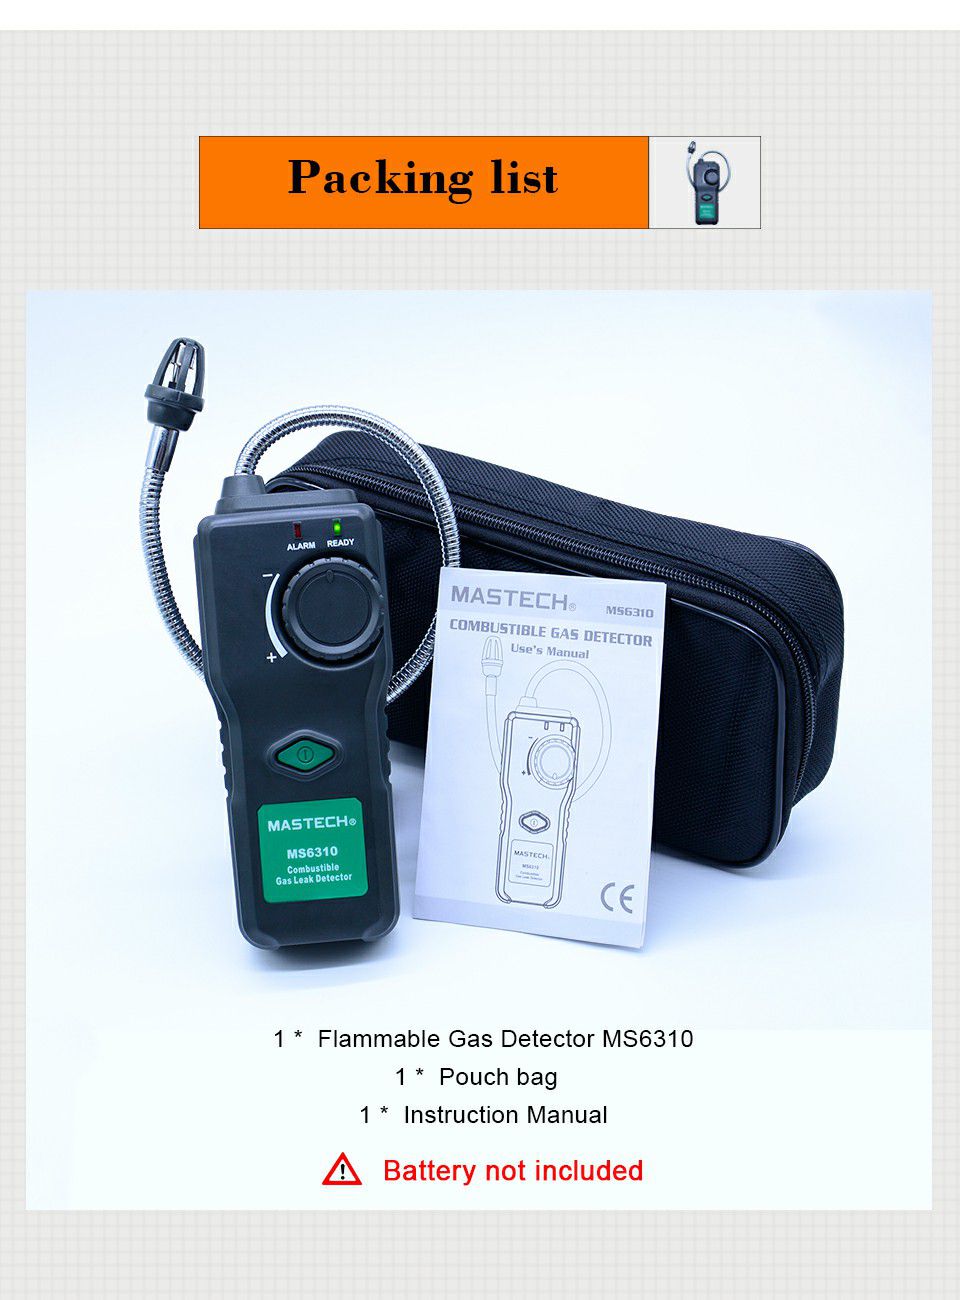 MS6310 Portable Combustible Gas Leak Detector Tester